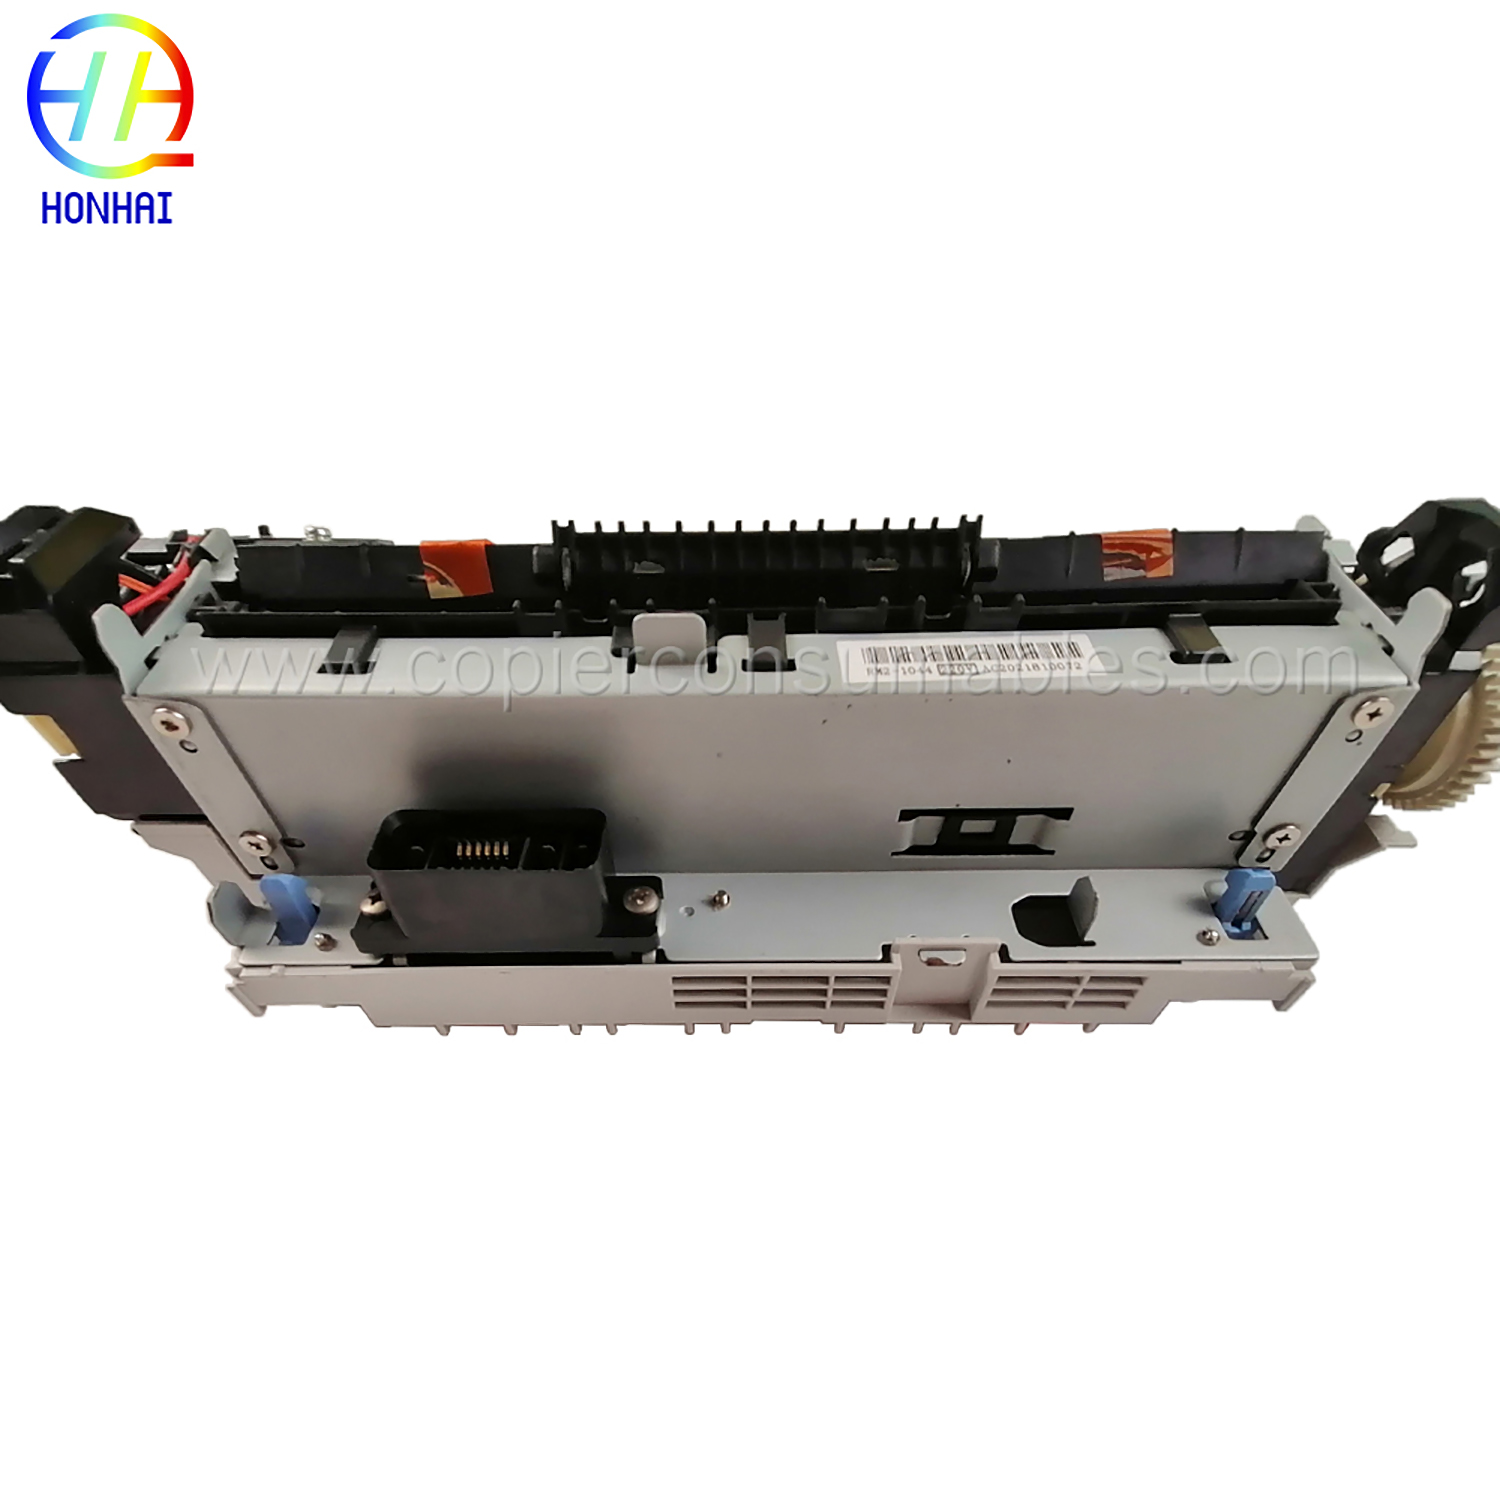 HP M4345 M4349 HP-RM1-1044 (6) for ئۈچۈن Fuser بىرلىكى 220v